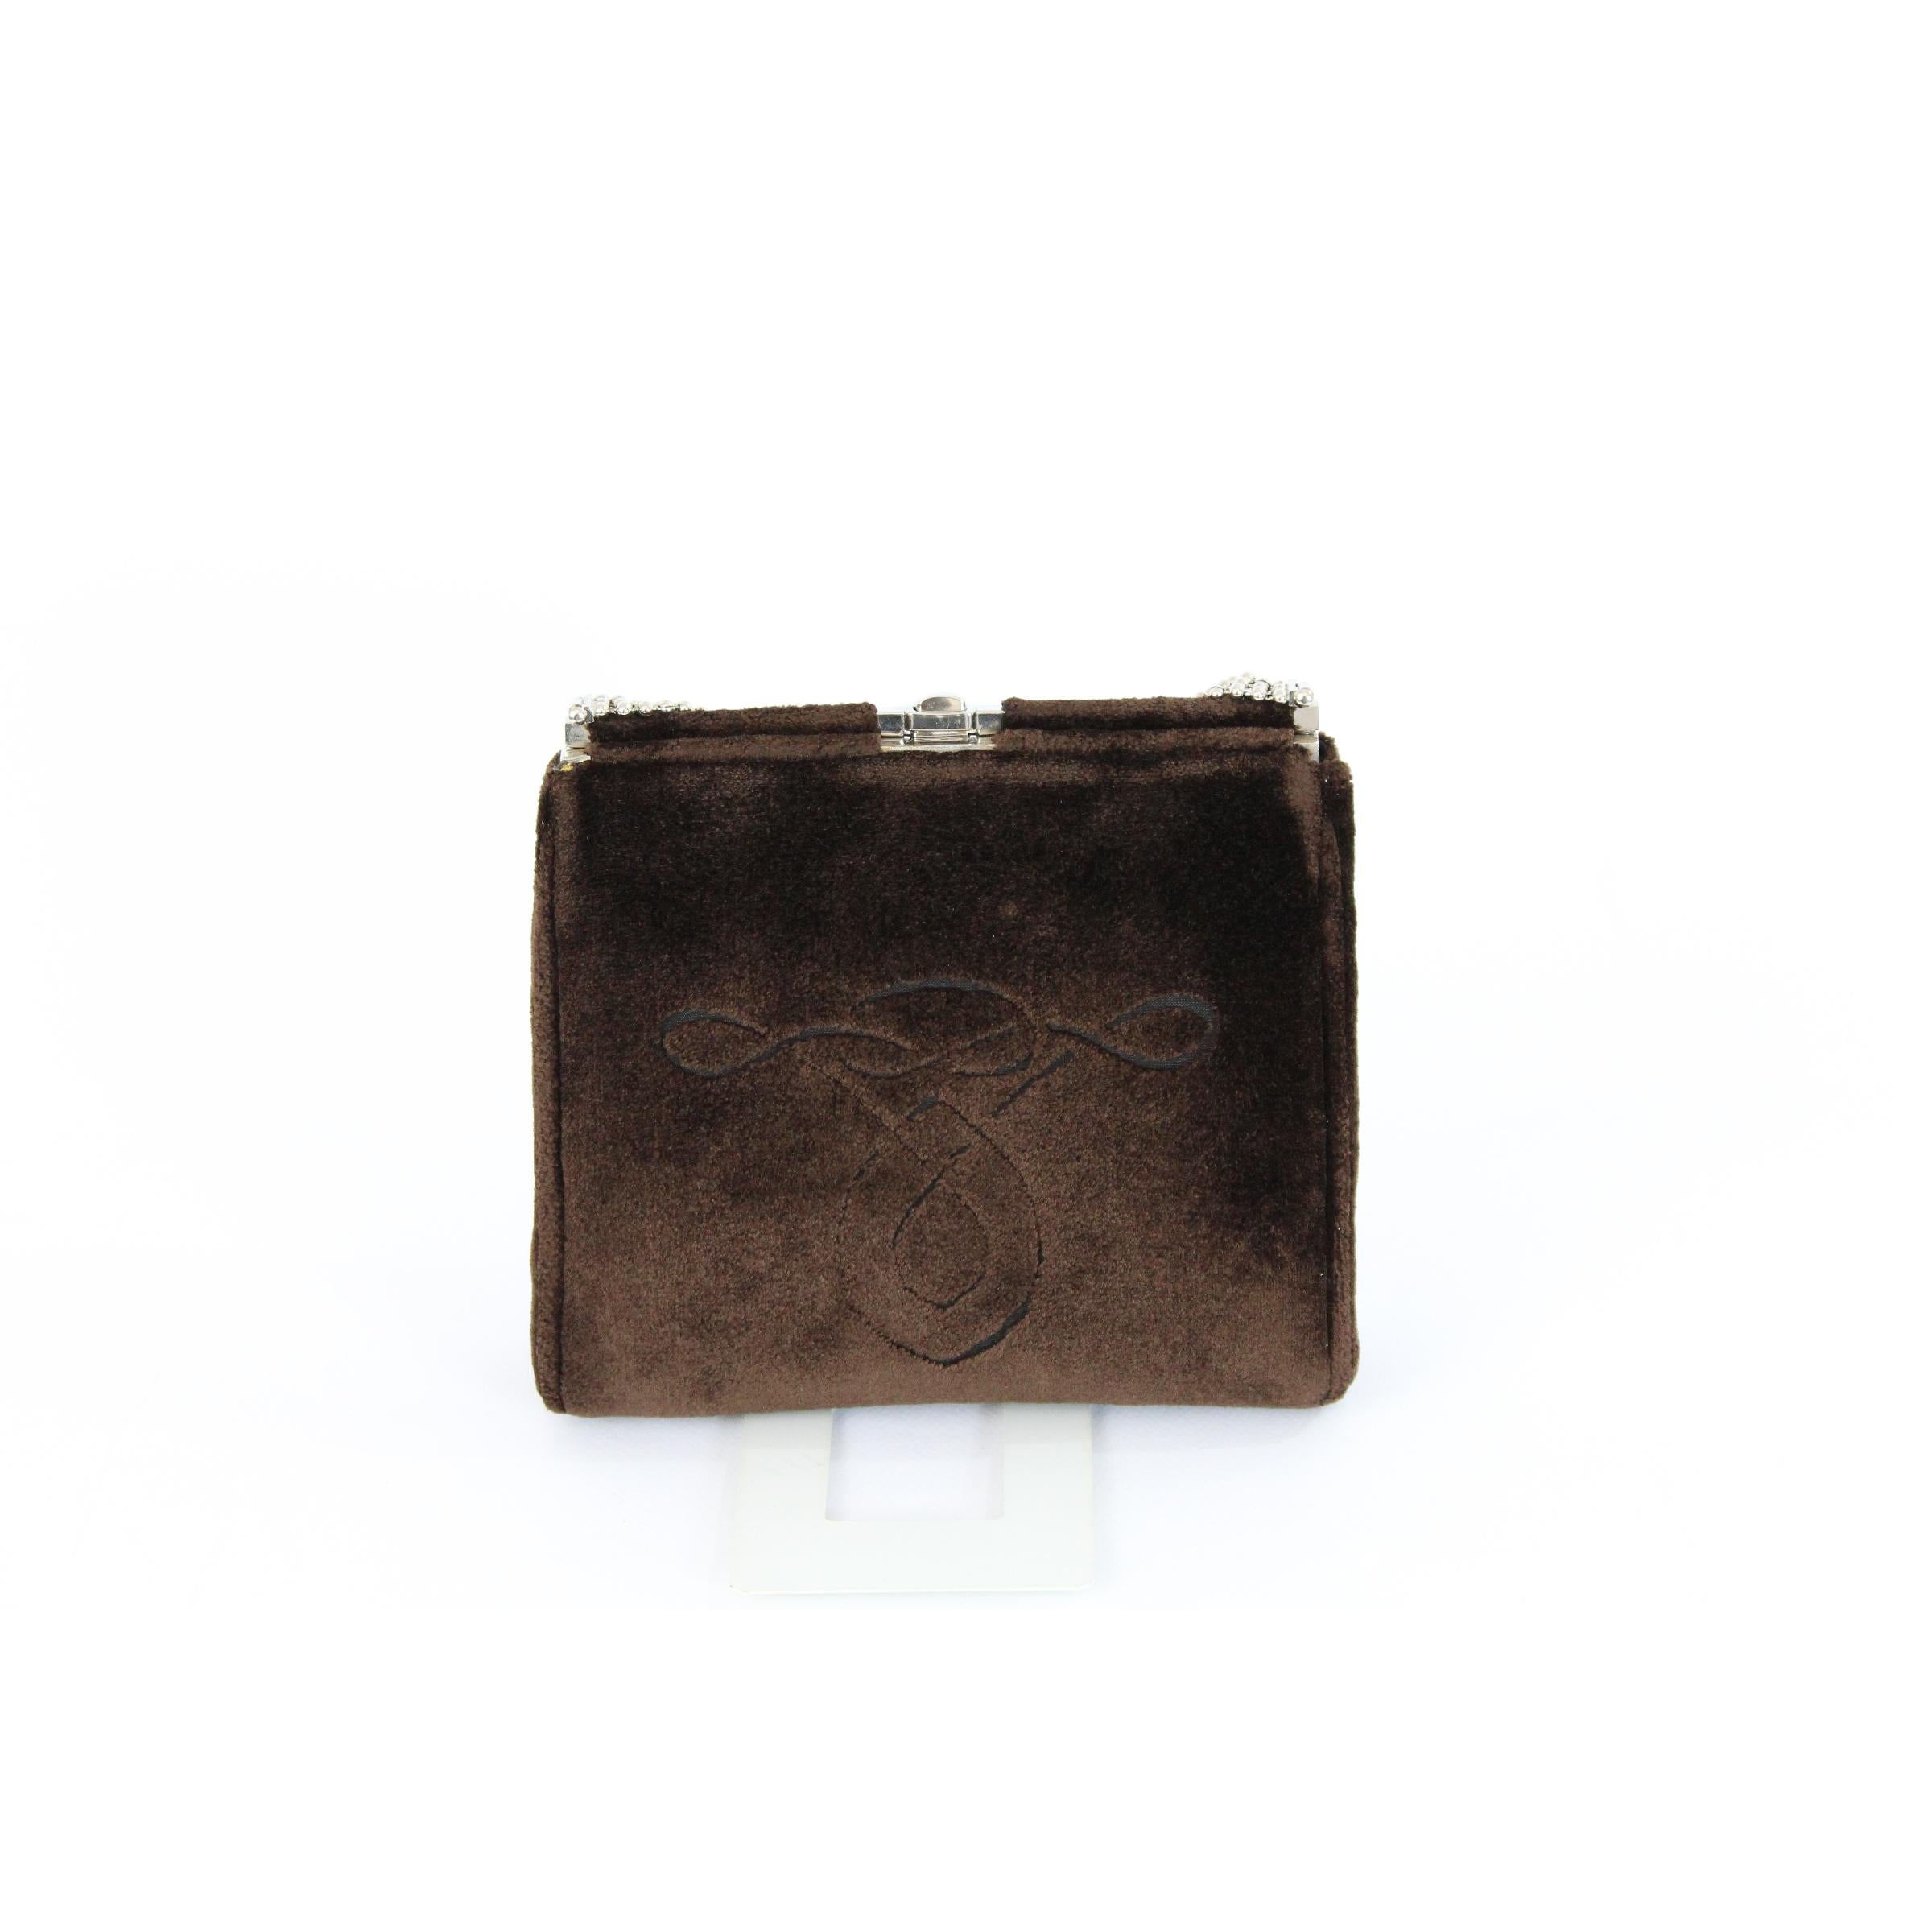 Cesare Piccini evening bag, brown velvet with chain shoulder strap, clasp closure, silver-colored details, leather interior. Original vintage 1960. Made in Italy. Excellent vintage conditions.

Measurements:

height: 17 cm
length: 19 cm
width: 6 cm